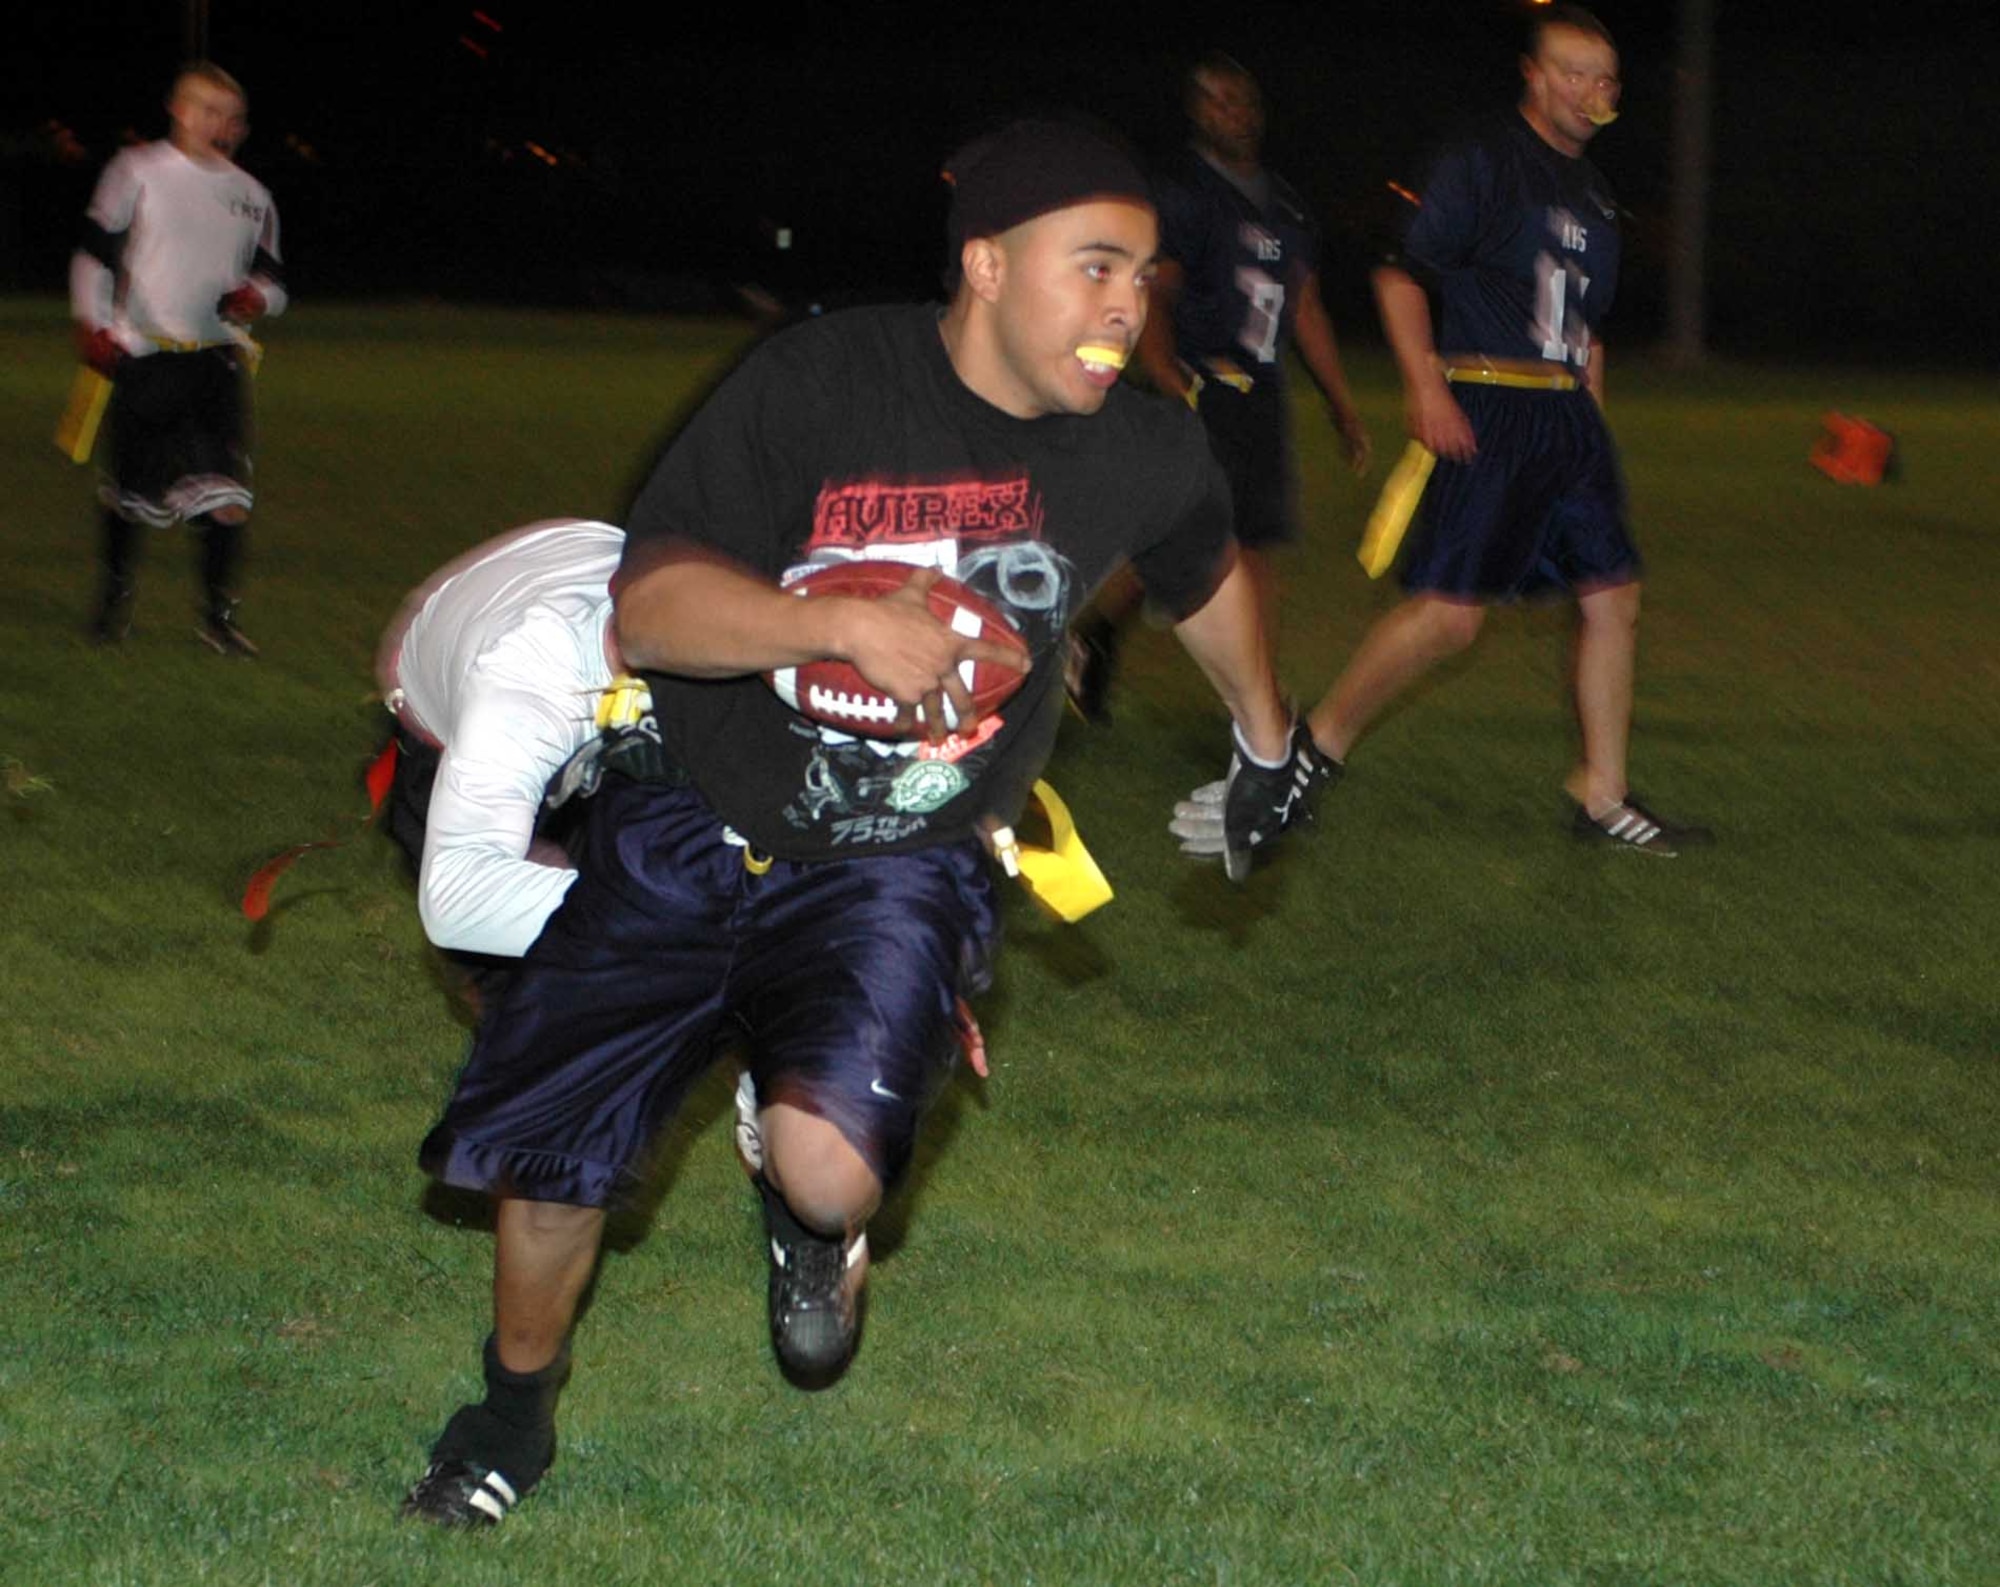 Brandon Chavez, Travis Gold All-Stars’ halfback, runs for a 40-yard gain during the Intramural Flag Football All-Star Classic Nov. 20. Chavez had 95 total rushing yards and an interception return for a touchdown. The Red All-Stars defeated the Gold All-Stars 14-12. (U.S. Air Force photo/Staff Sgt. Candy Knight)